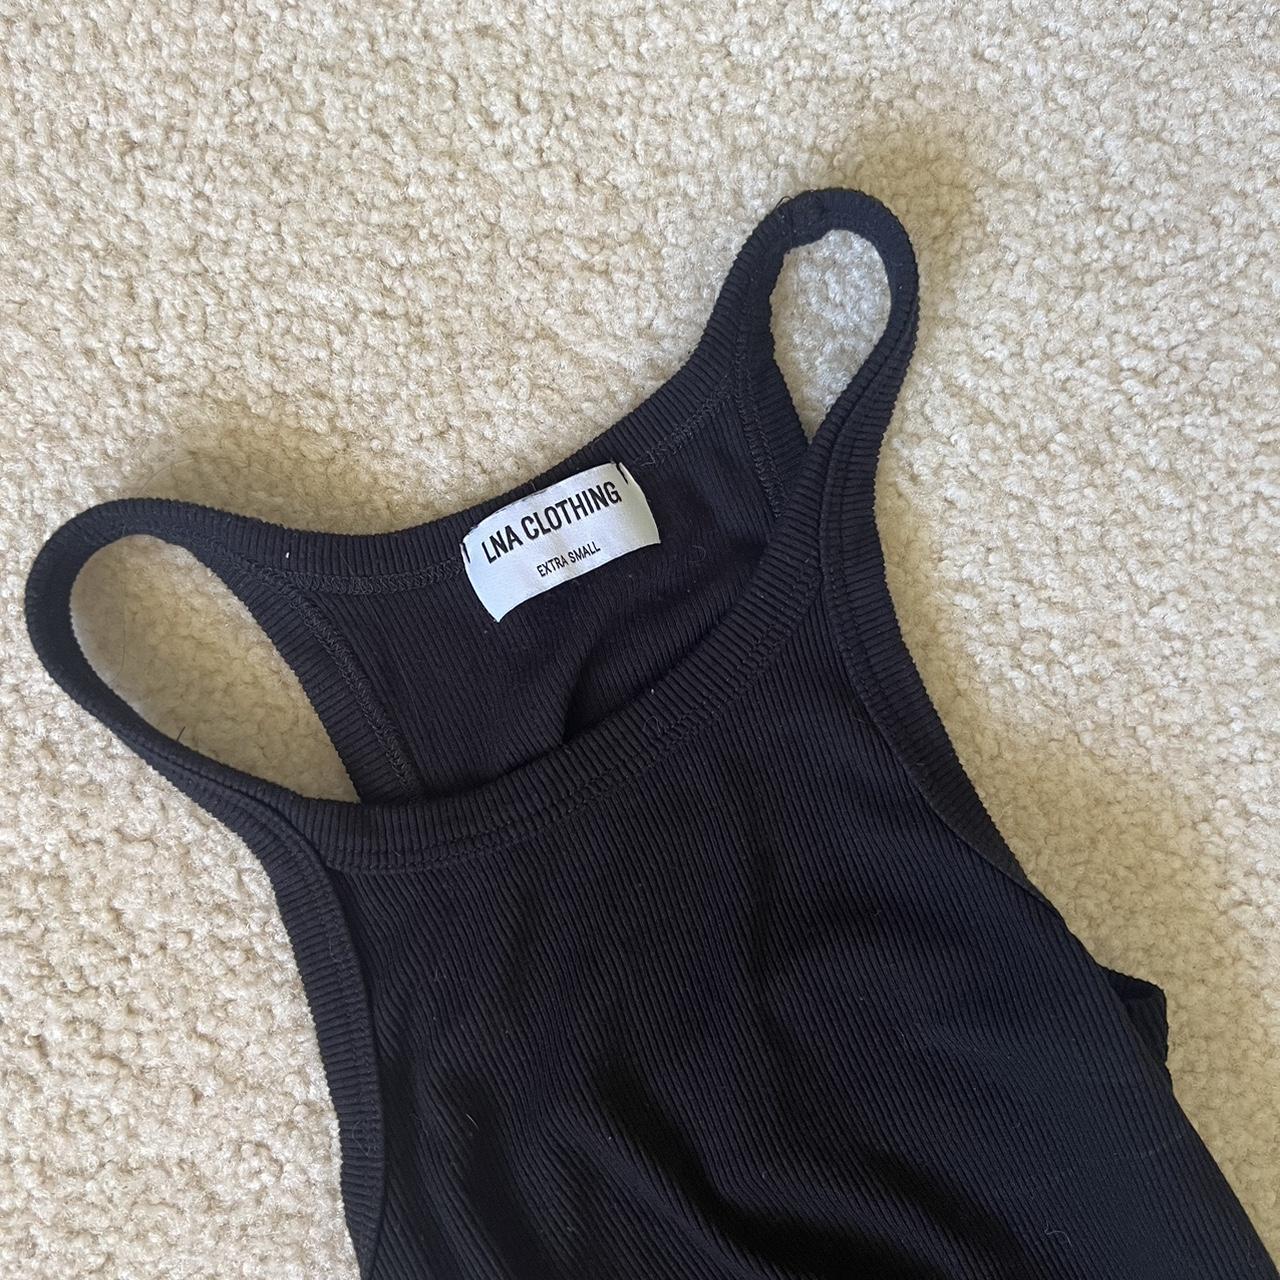 Skims dupe tank top, super stretchy and - Depop